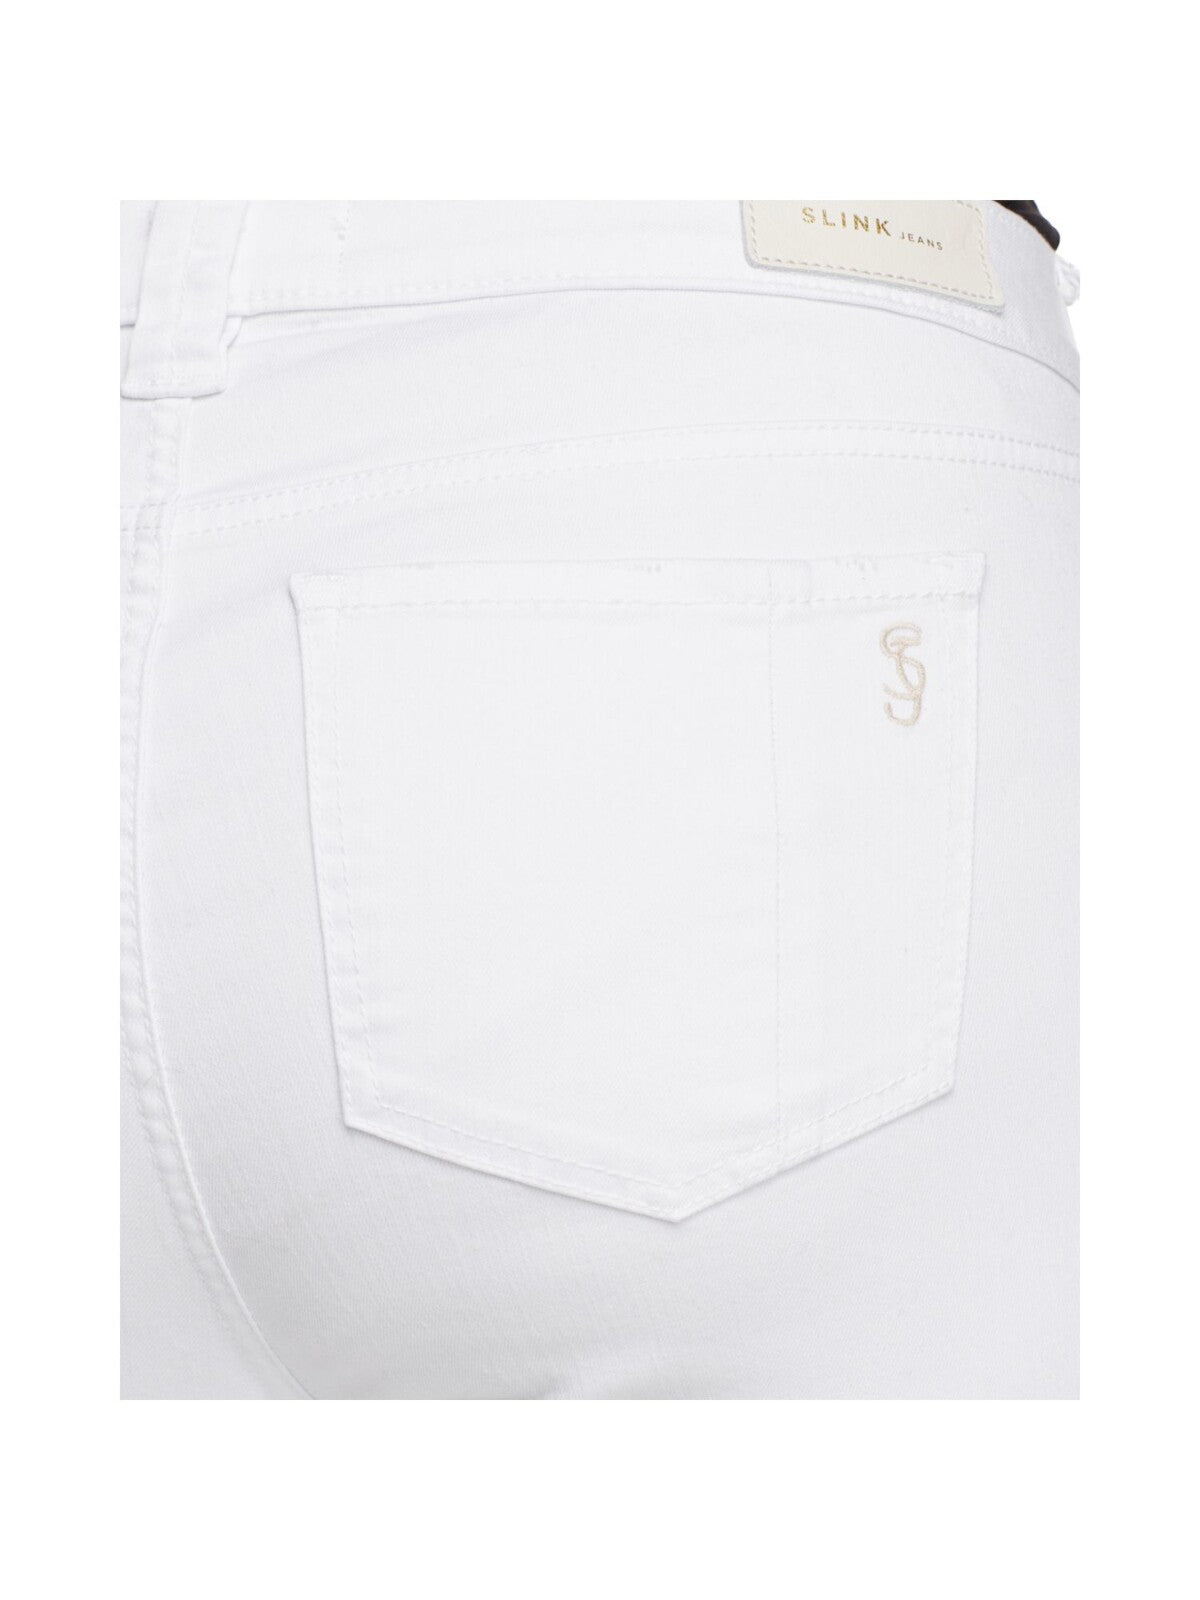 SLINK JEANS Womens White Cotton Blend Zippered Pocketed Skinny Stretch Easy Care Buttone Wear To Work Cropped Pants